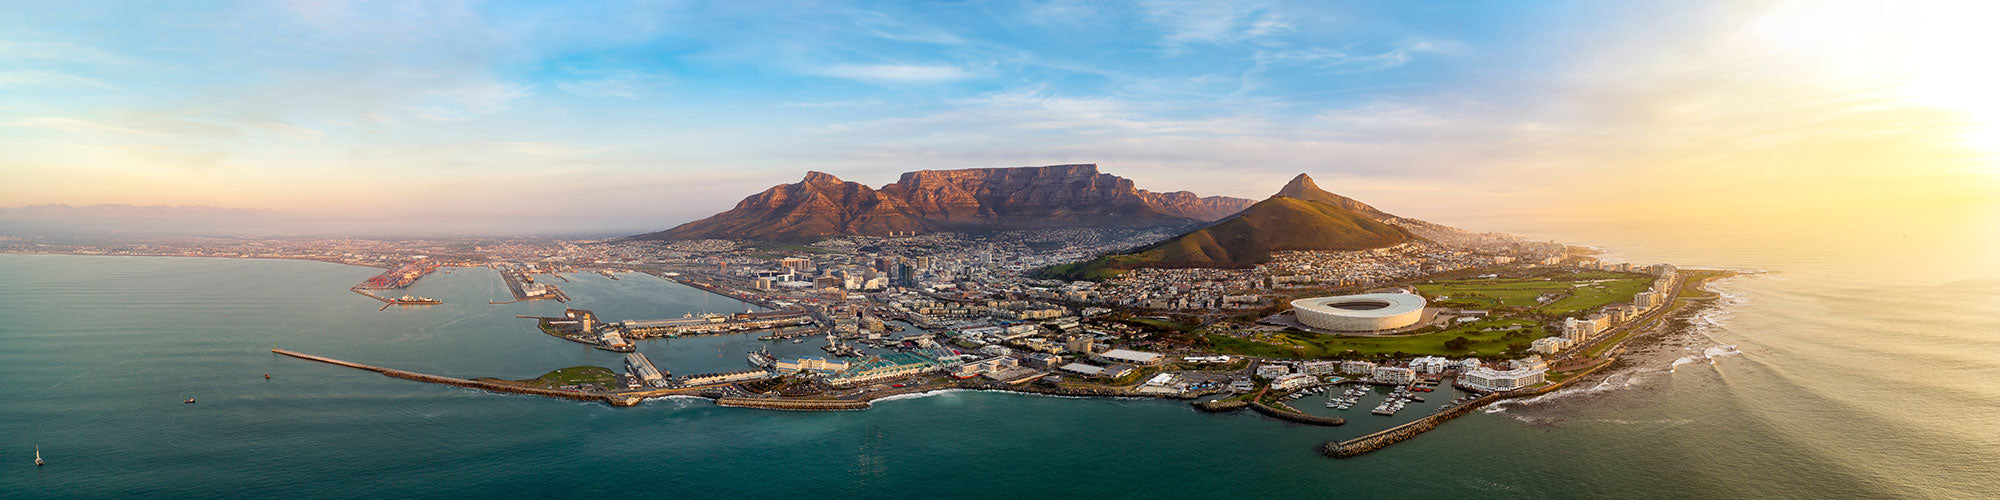 Fine Art Photography Prints of Cape Town - Satellite Images of Earth - Point Two Design